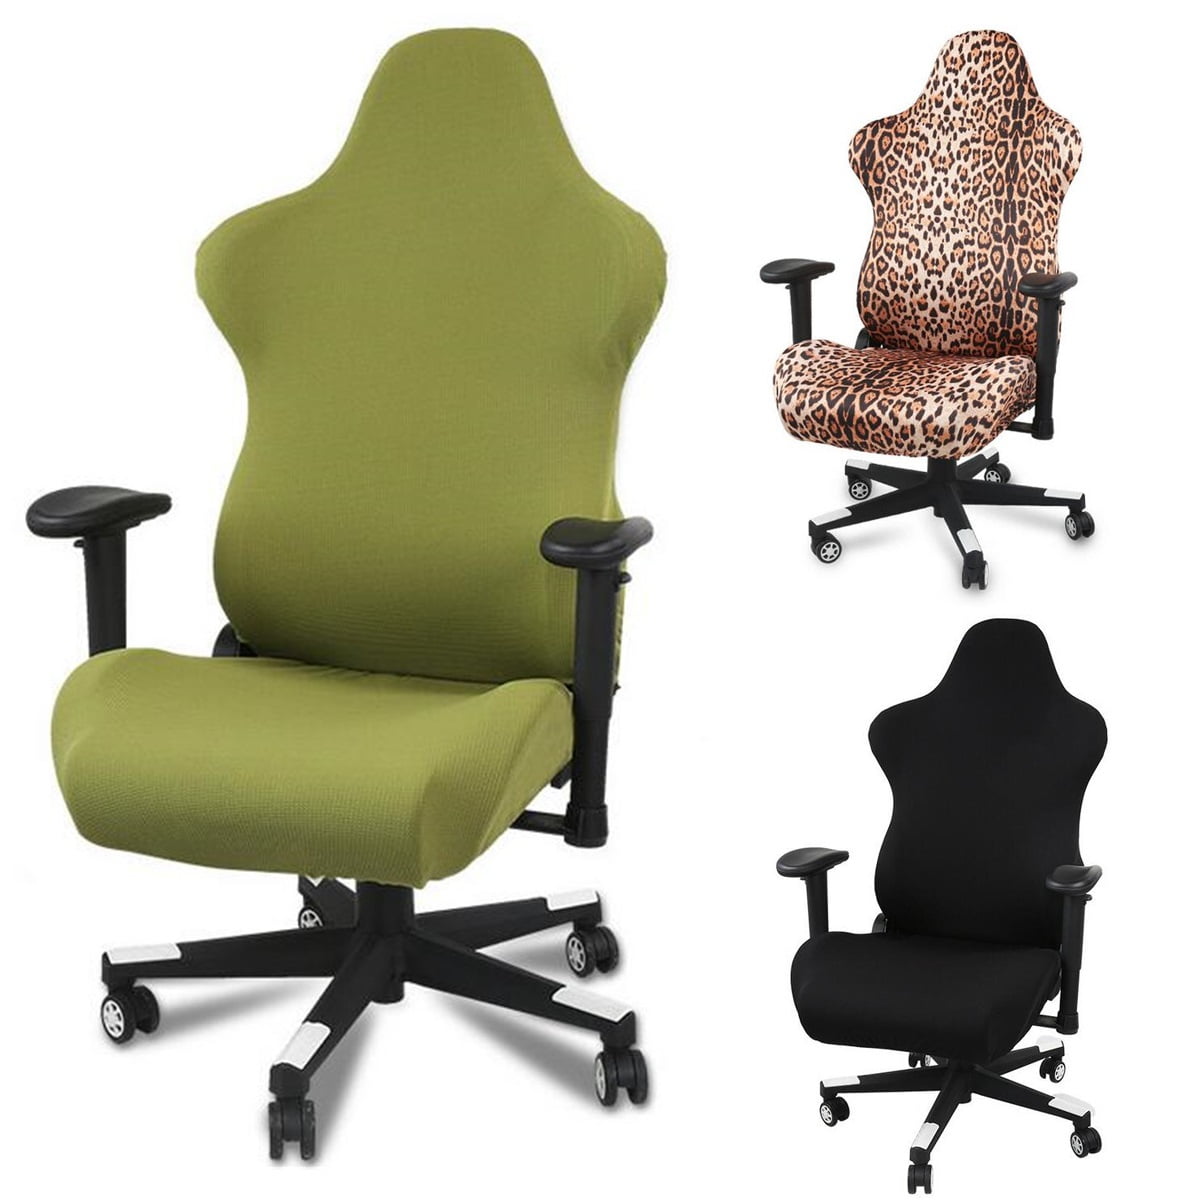 BTSKY Ergonomic Office Computer Game Chair Slipcovers Stretchy Polyester Covers 